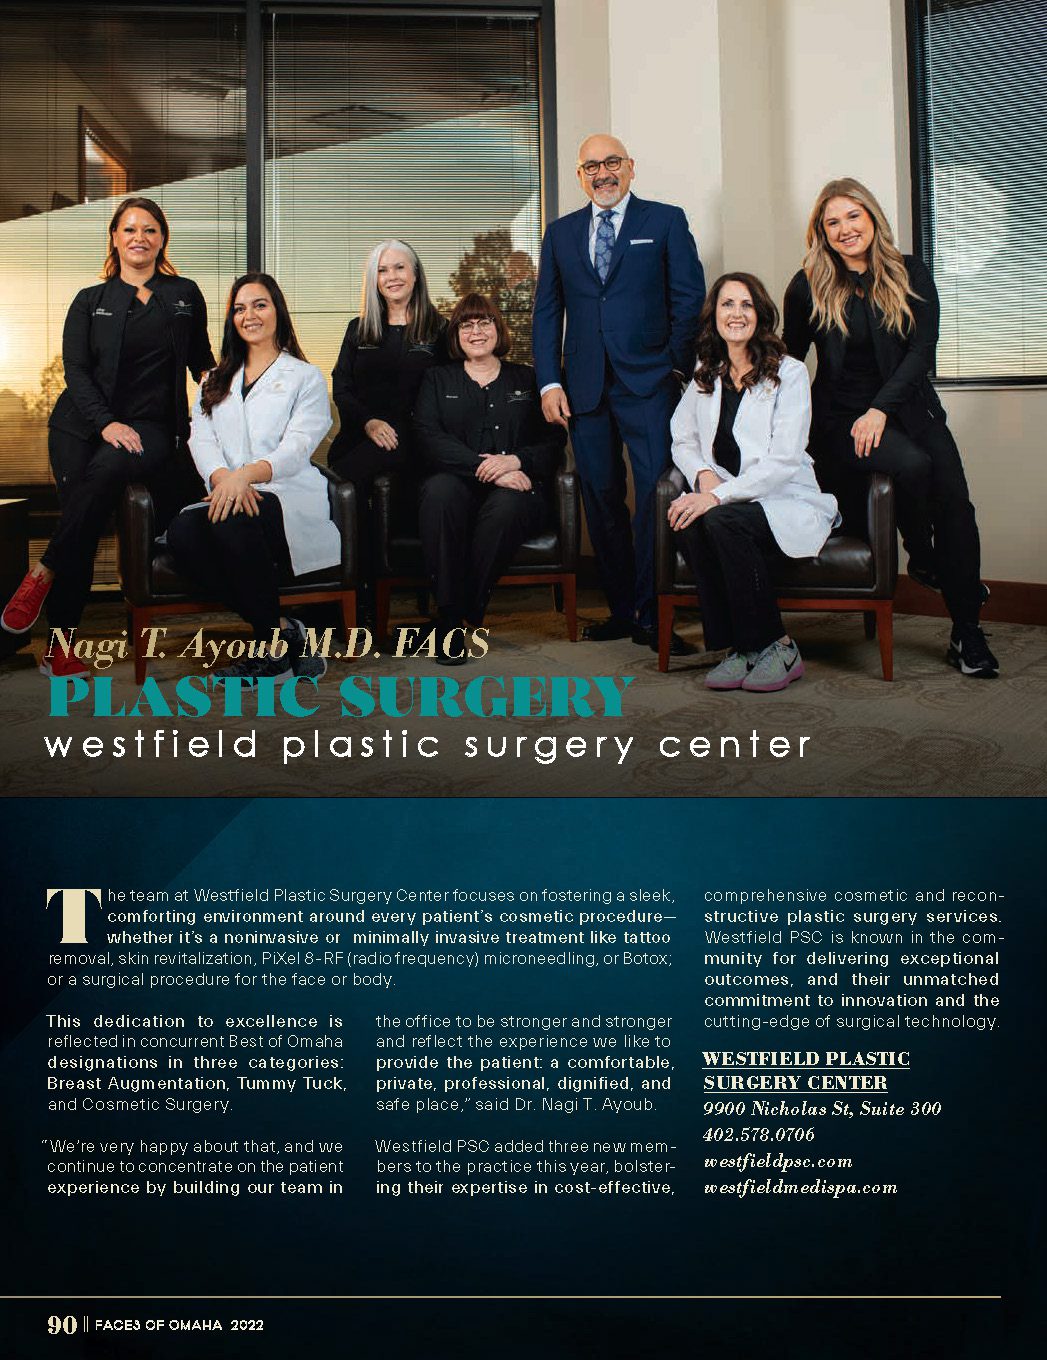 Nagi T. Ayoub and Team at Westfield Plastic Surgery in Magazine